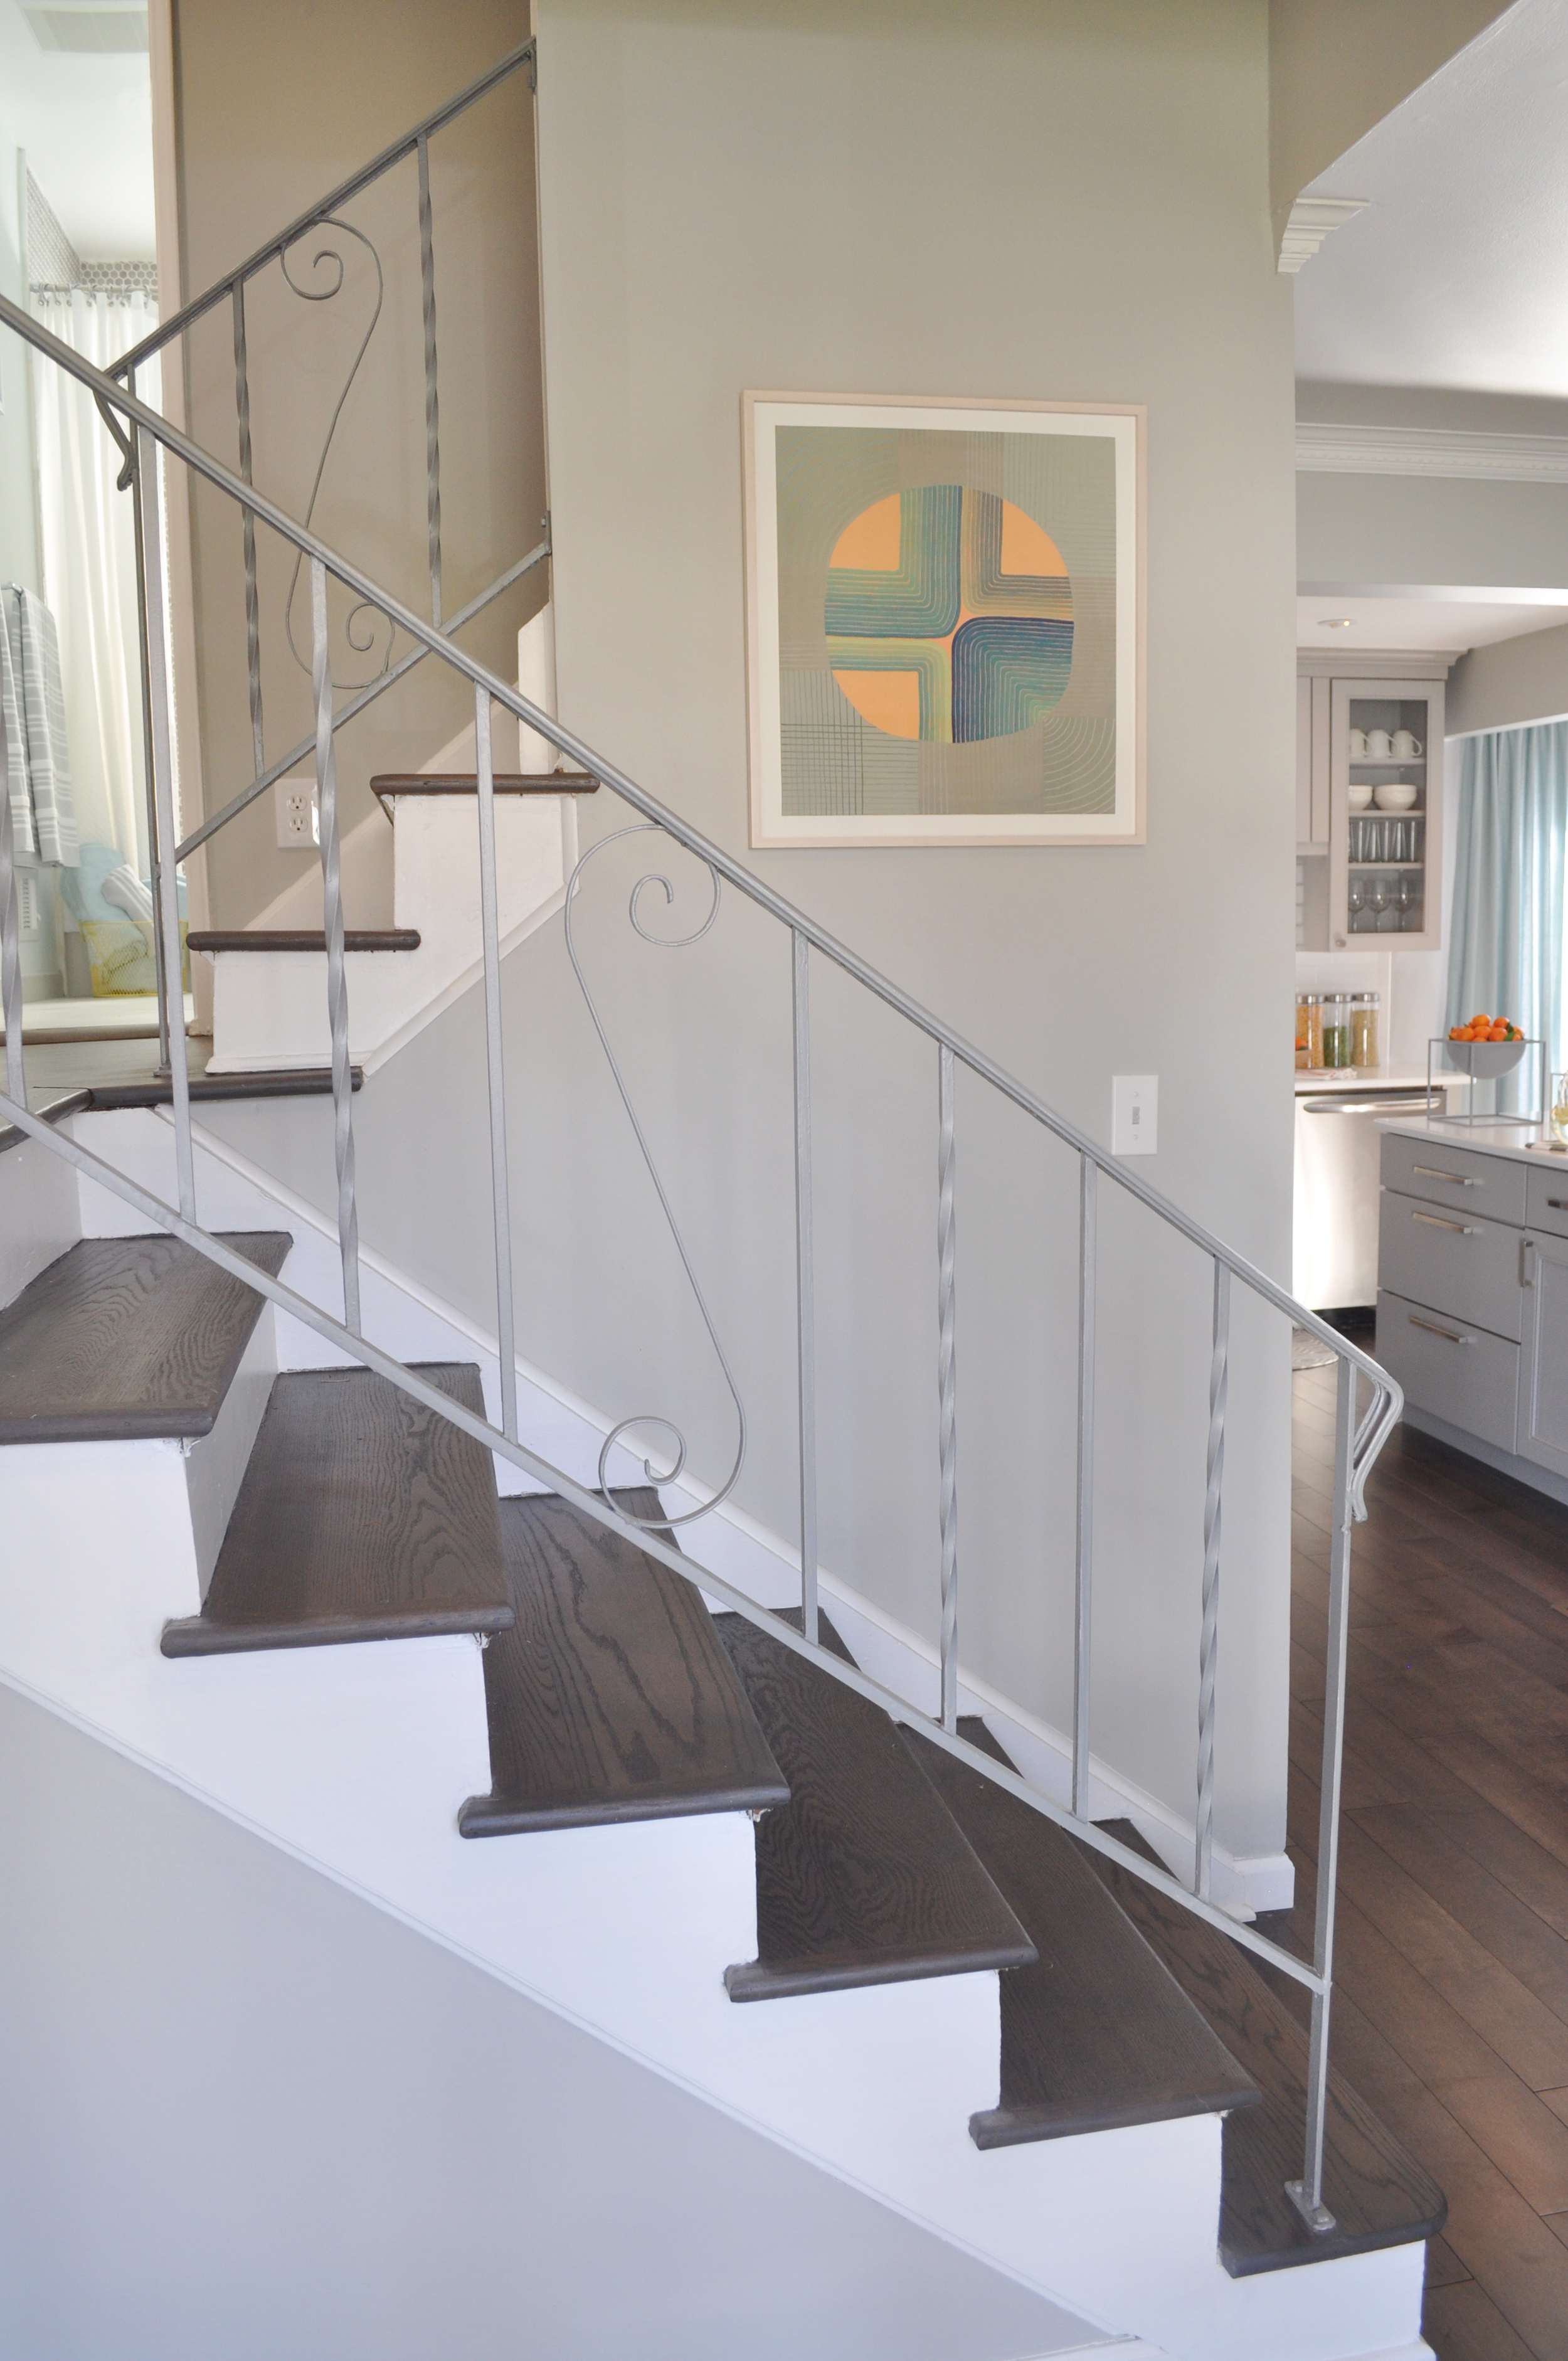 Kim Annick Mitchell Production Designer_HGTV_Buying and Seling with The Property Brothers_Season 3_Episode 316_Gray Entry Staircase_Modern Art.jpg